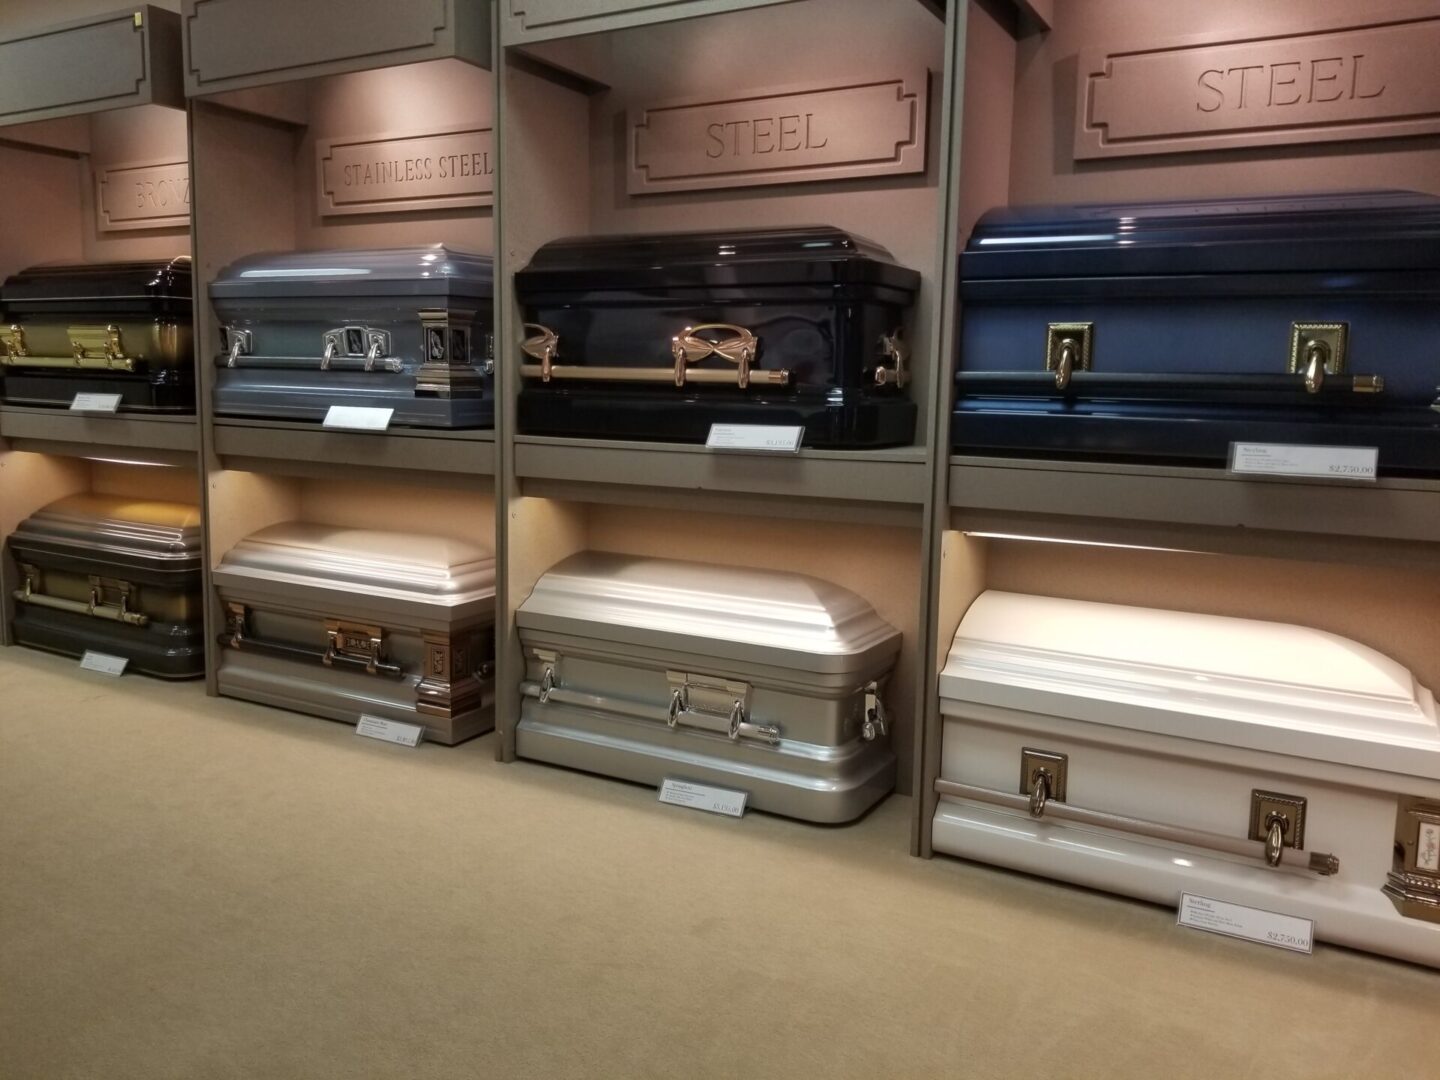 Charter Funeral Home